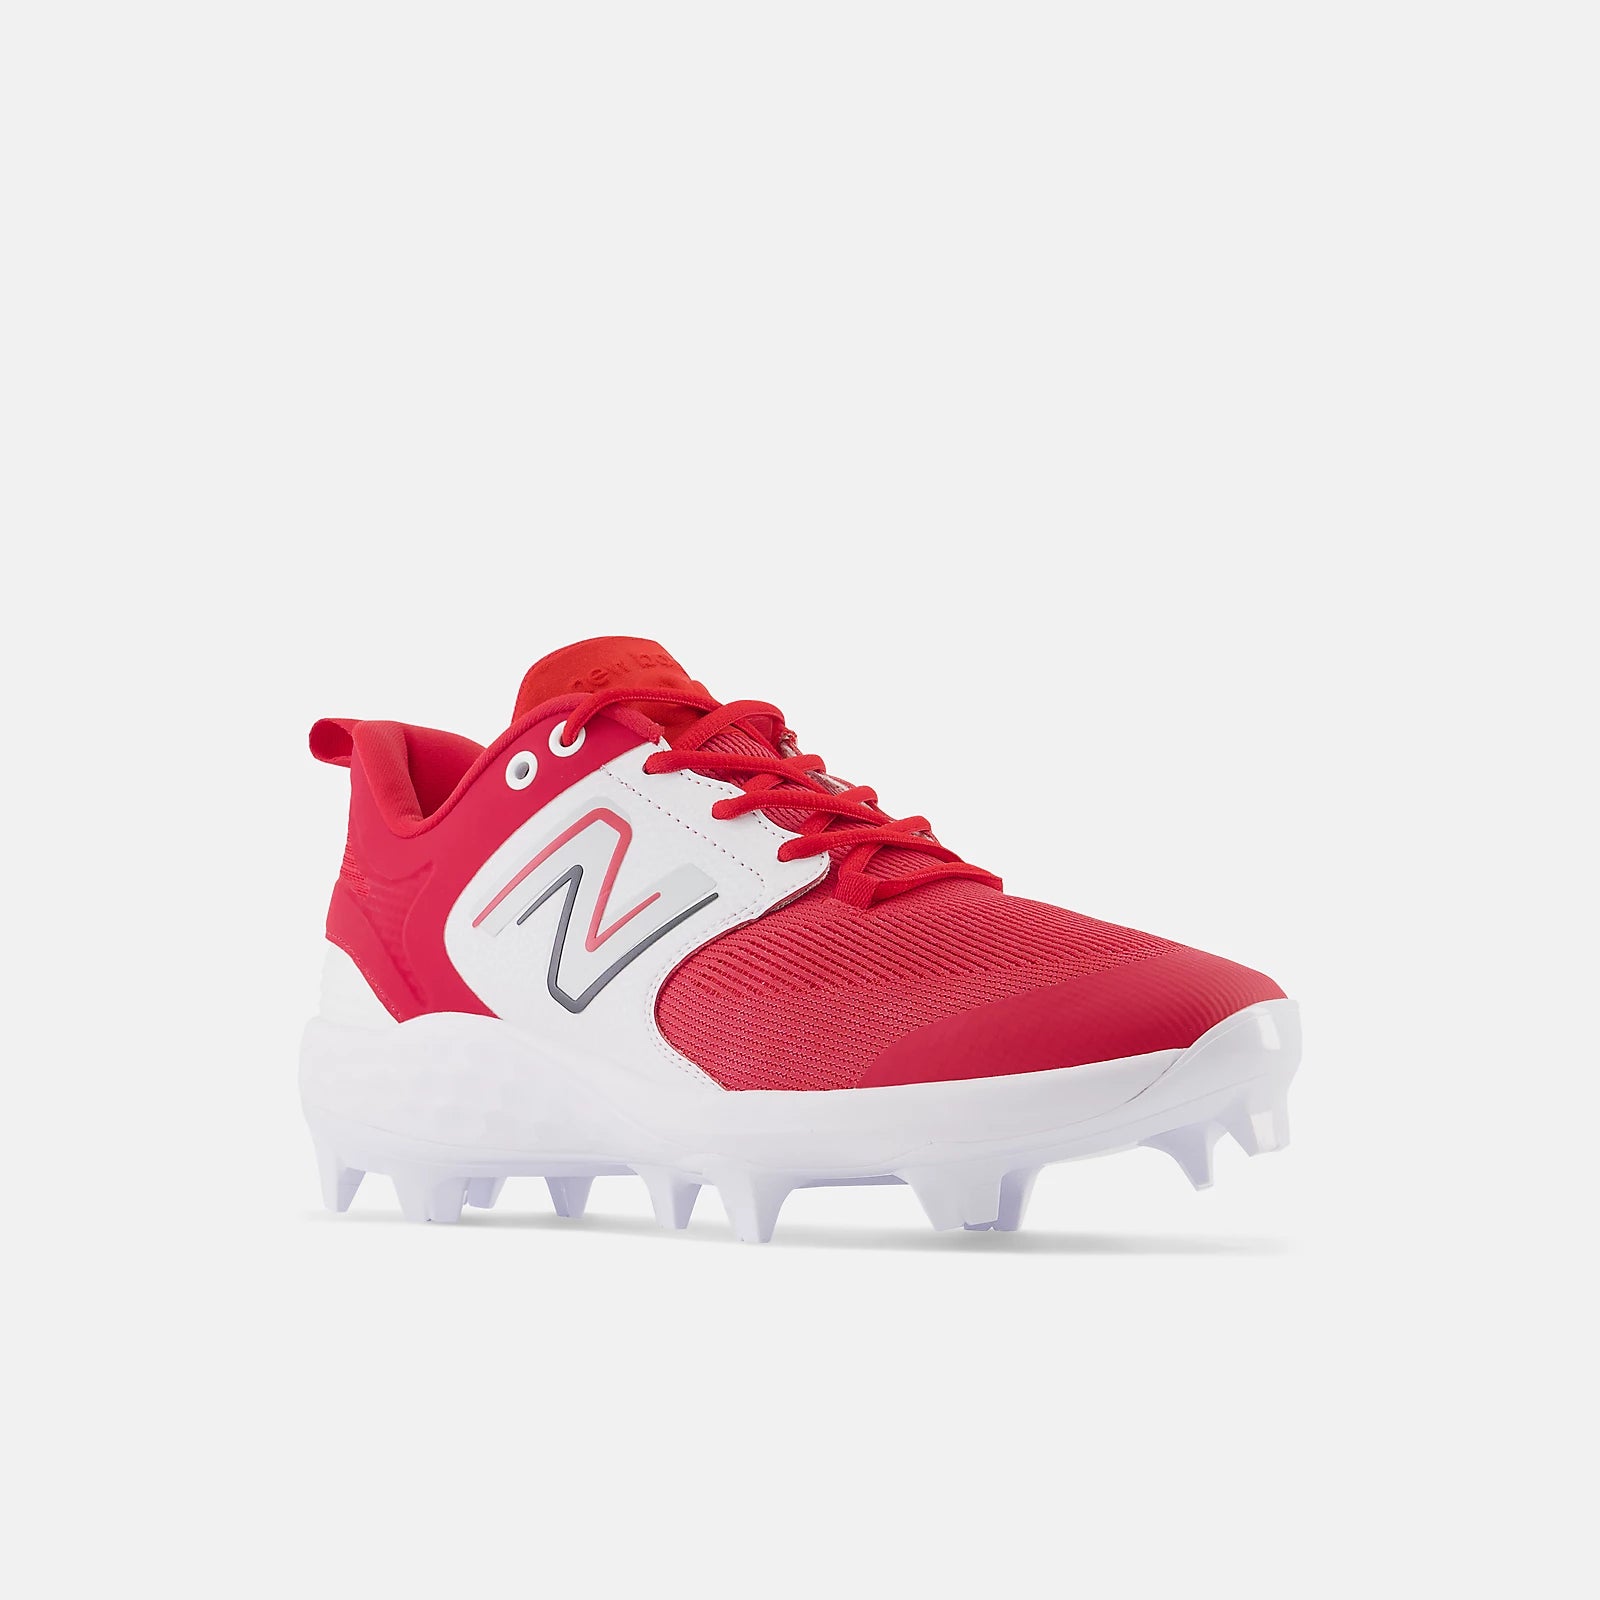 New Balance Red PL3000v6 Molded Cleats